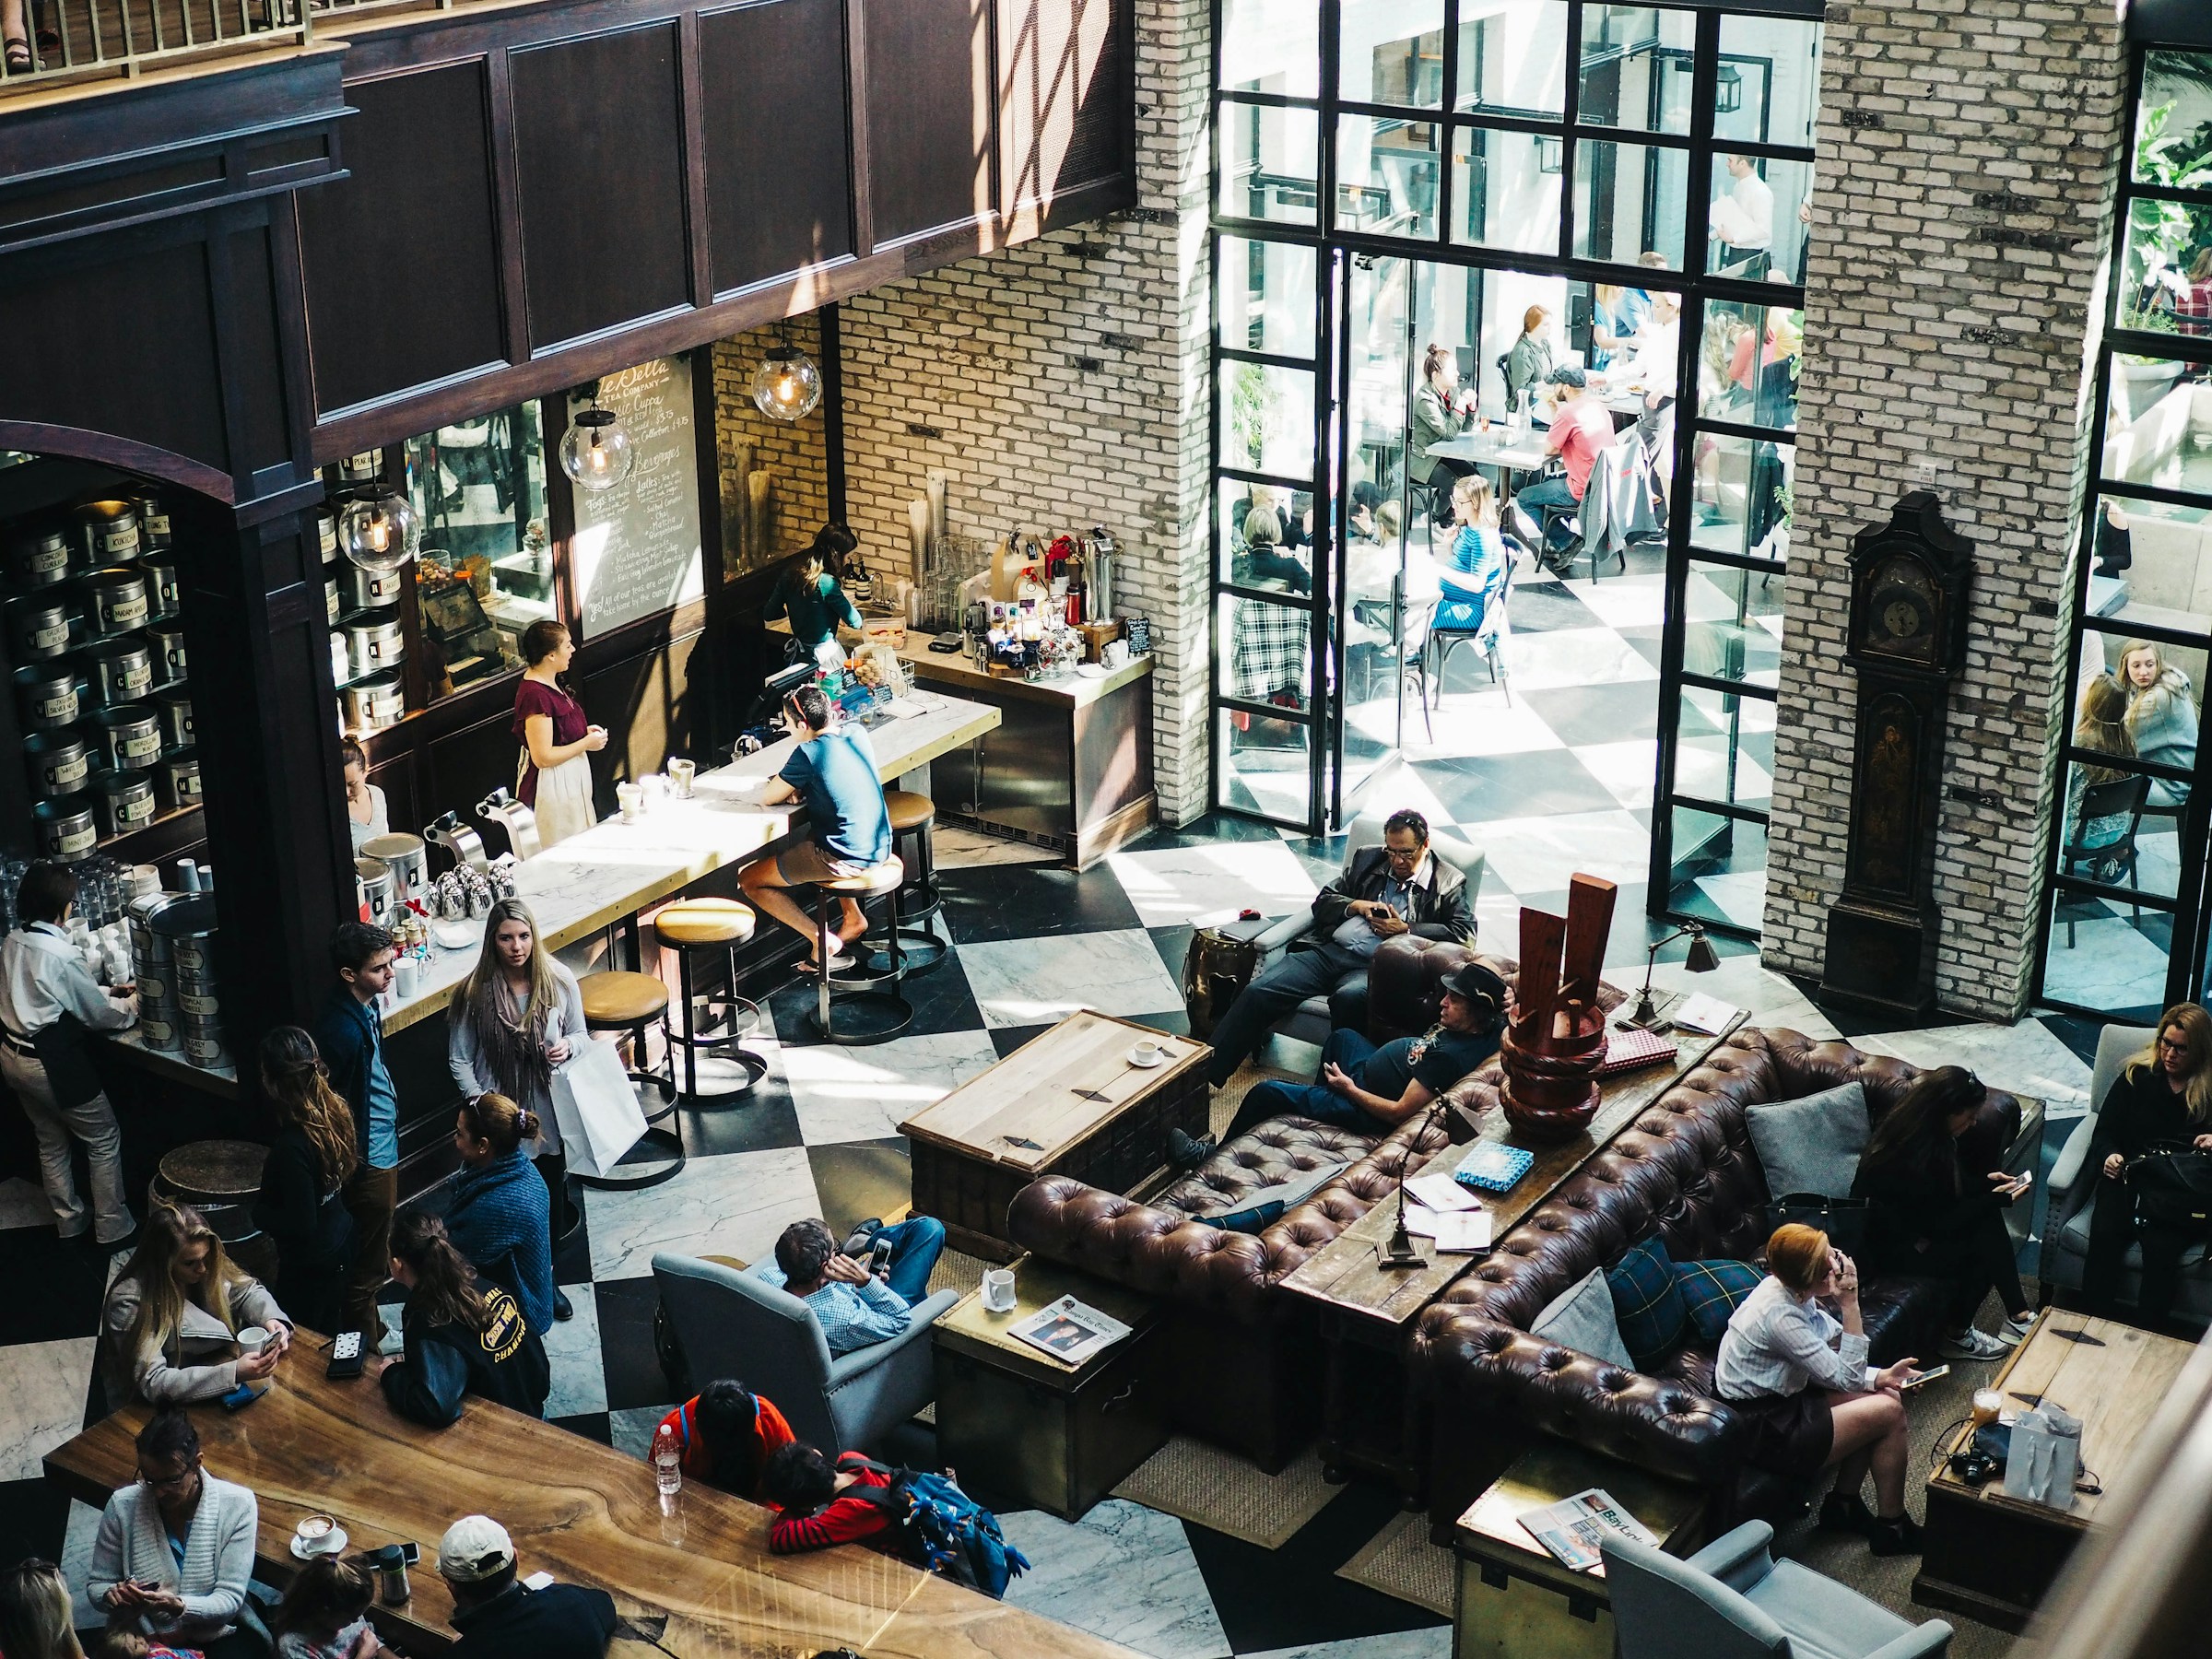 Aerial view of a coffee shop | Source: Unsplash